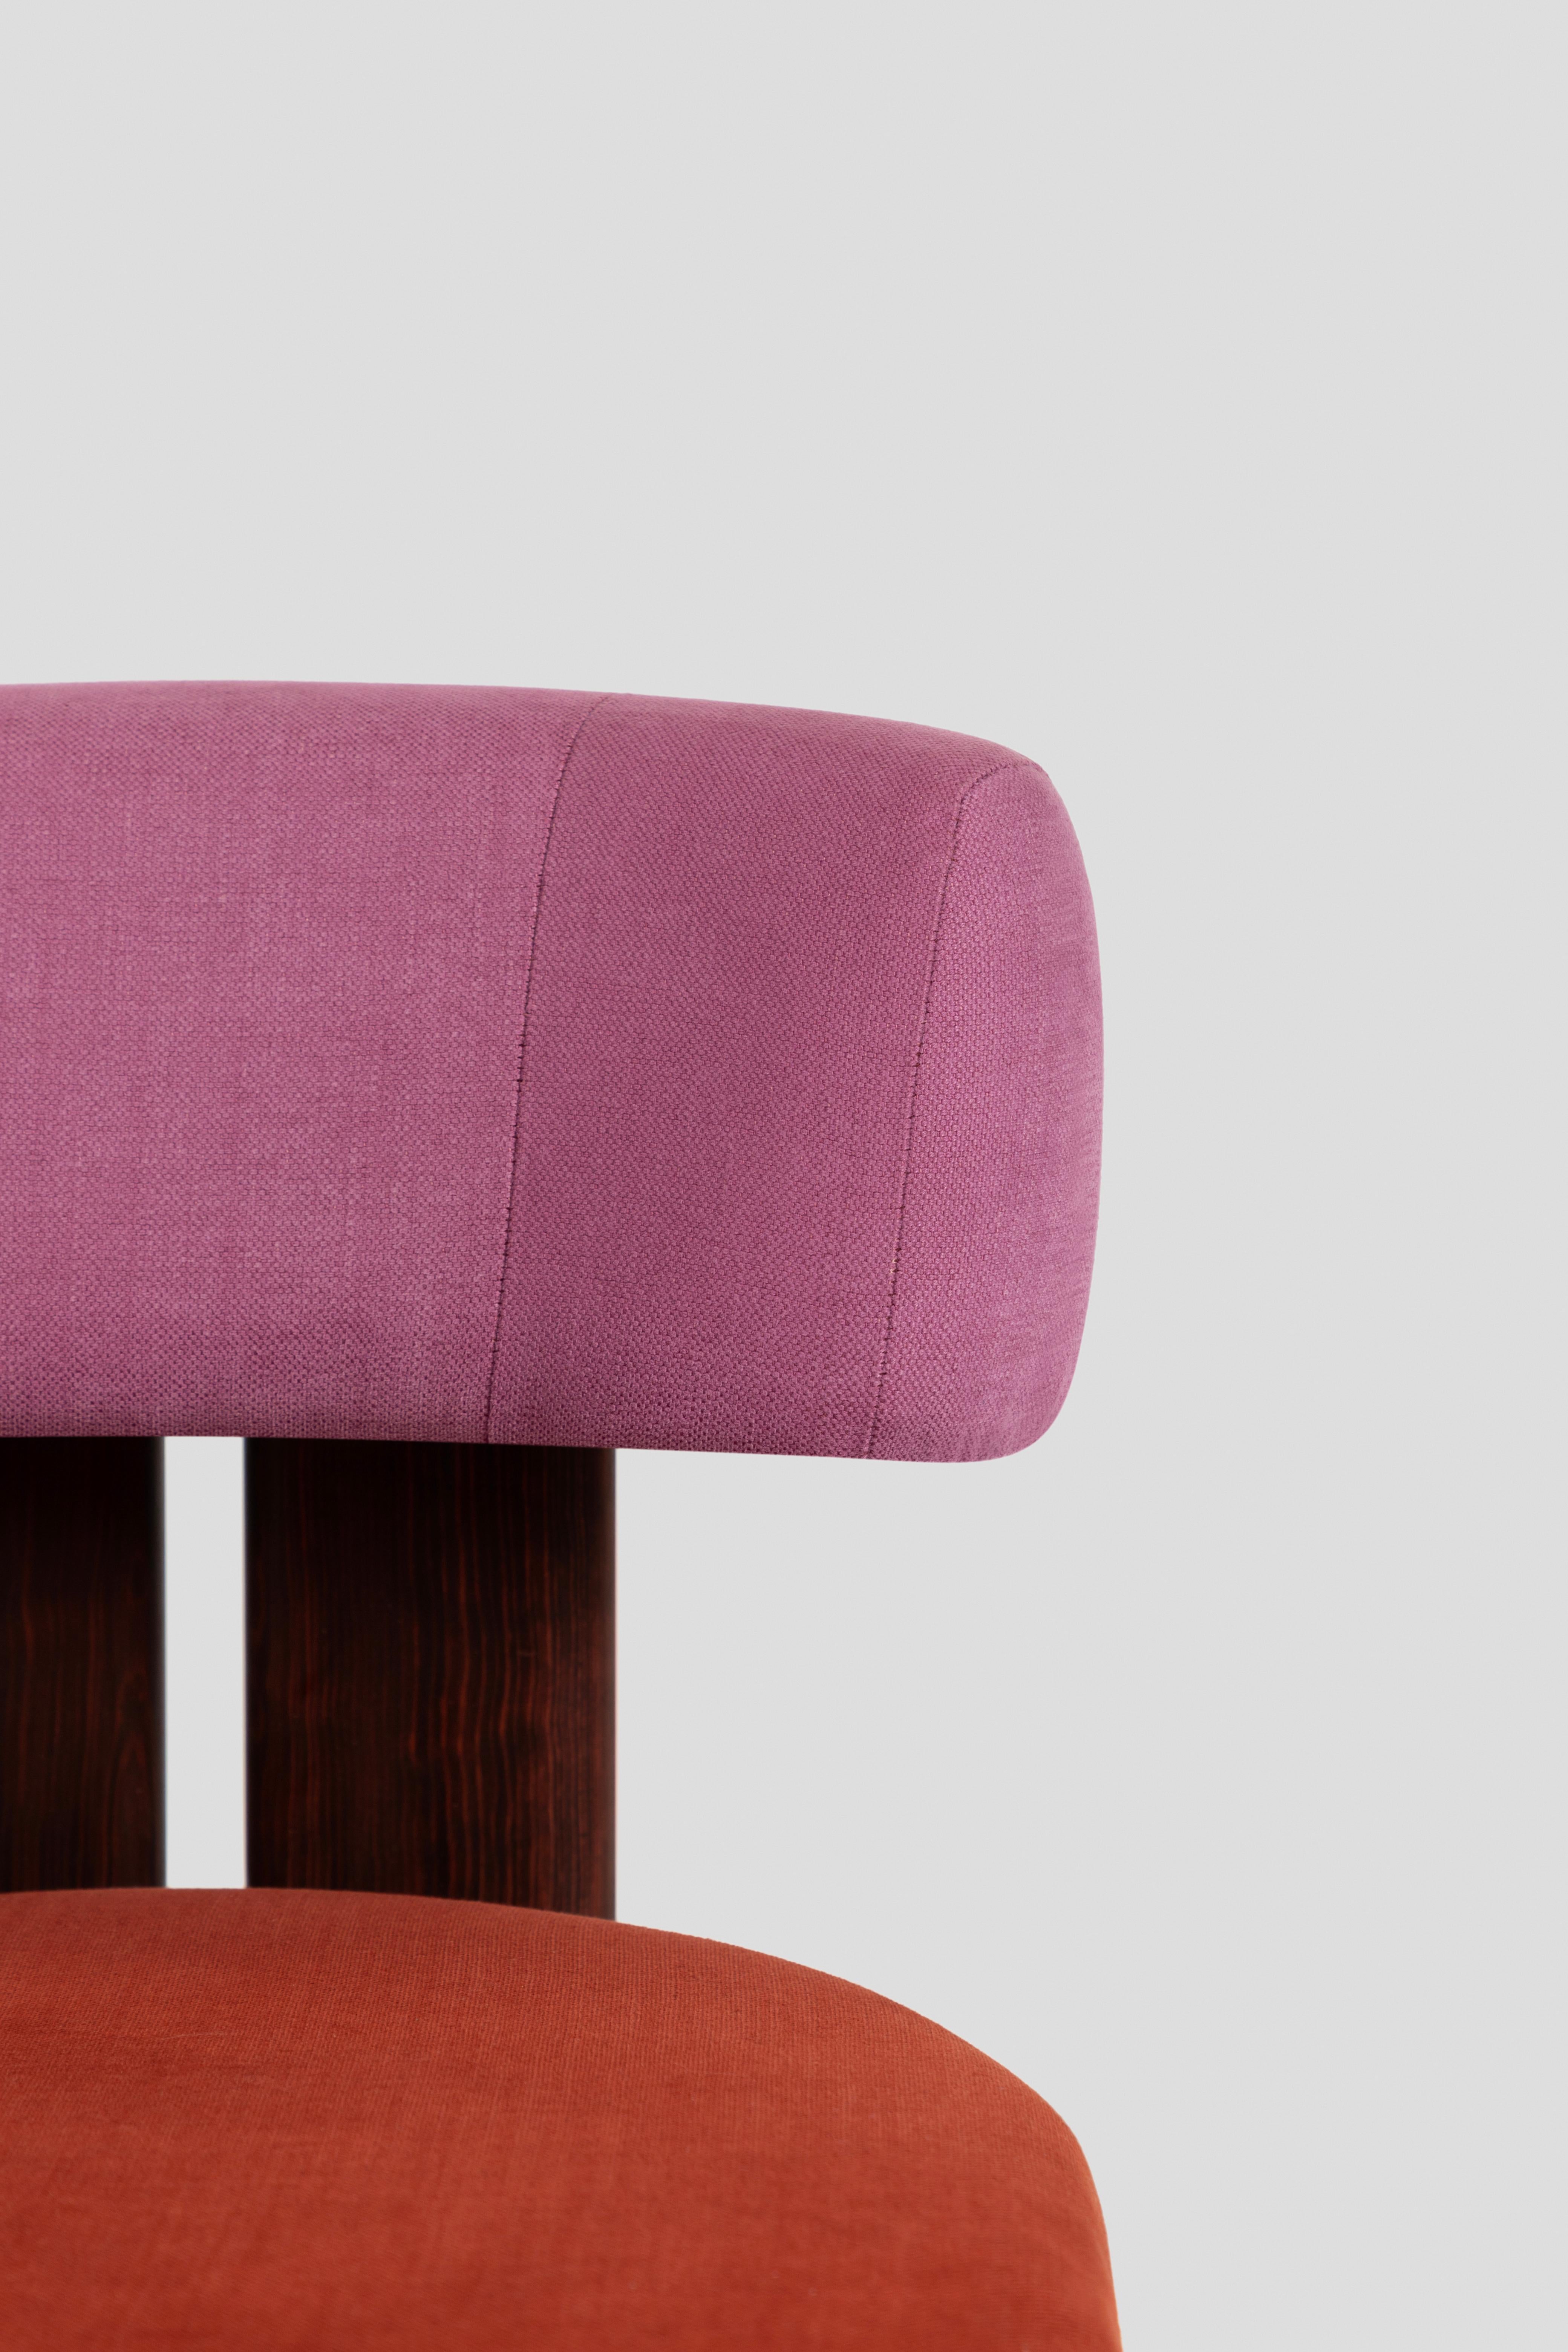 Contemporary Modern De la Paz Wood Dining Chair Wood, Burgundy and Pink Upholstery  For Sale